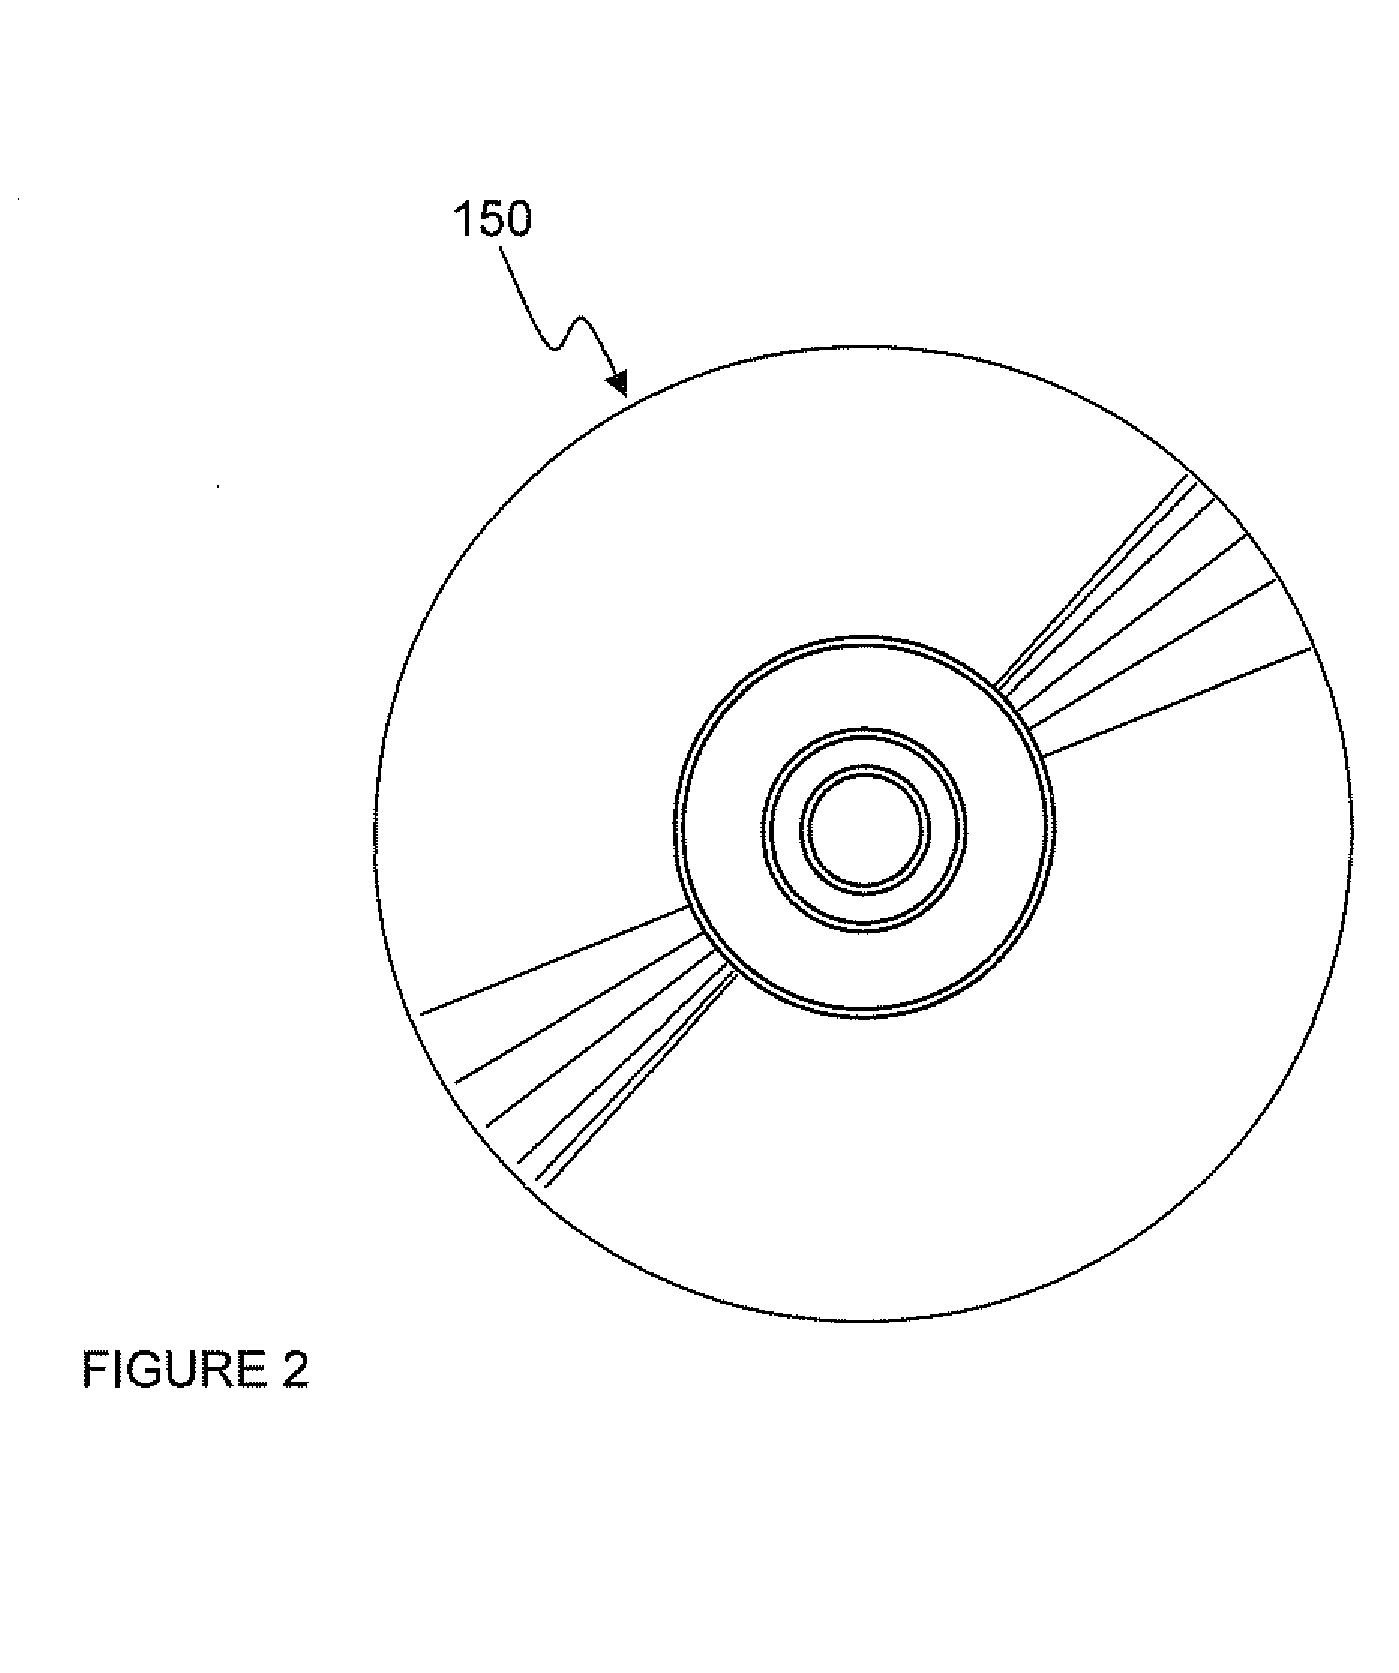 Method and apparatus for producing customized food blends for animals